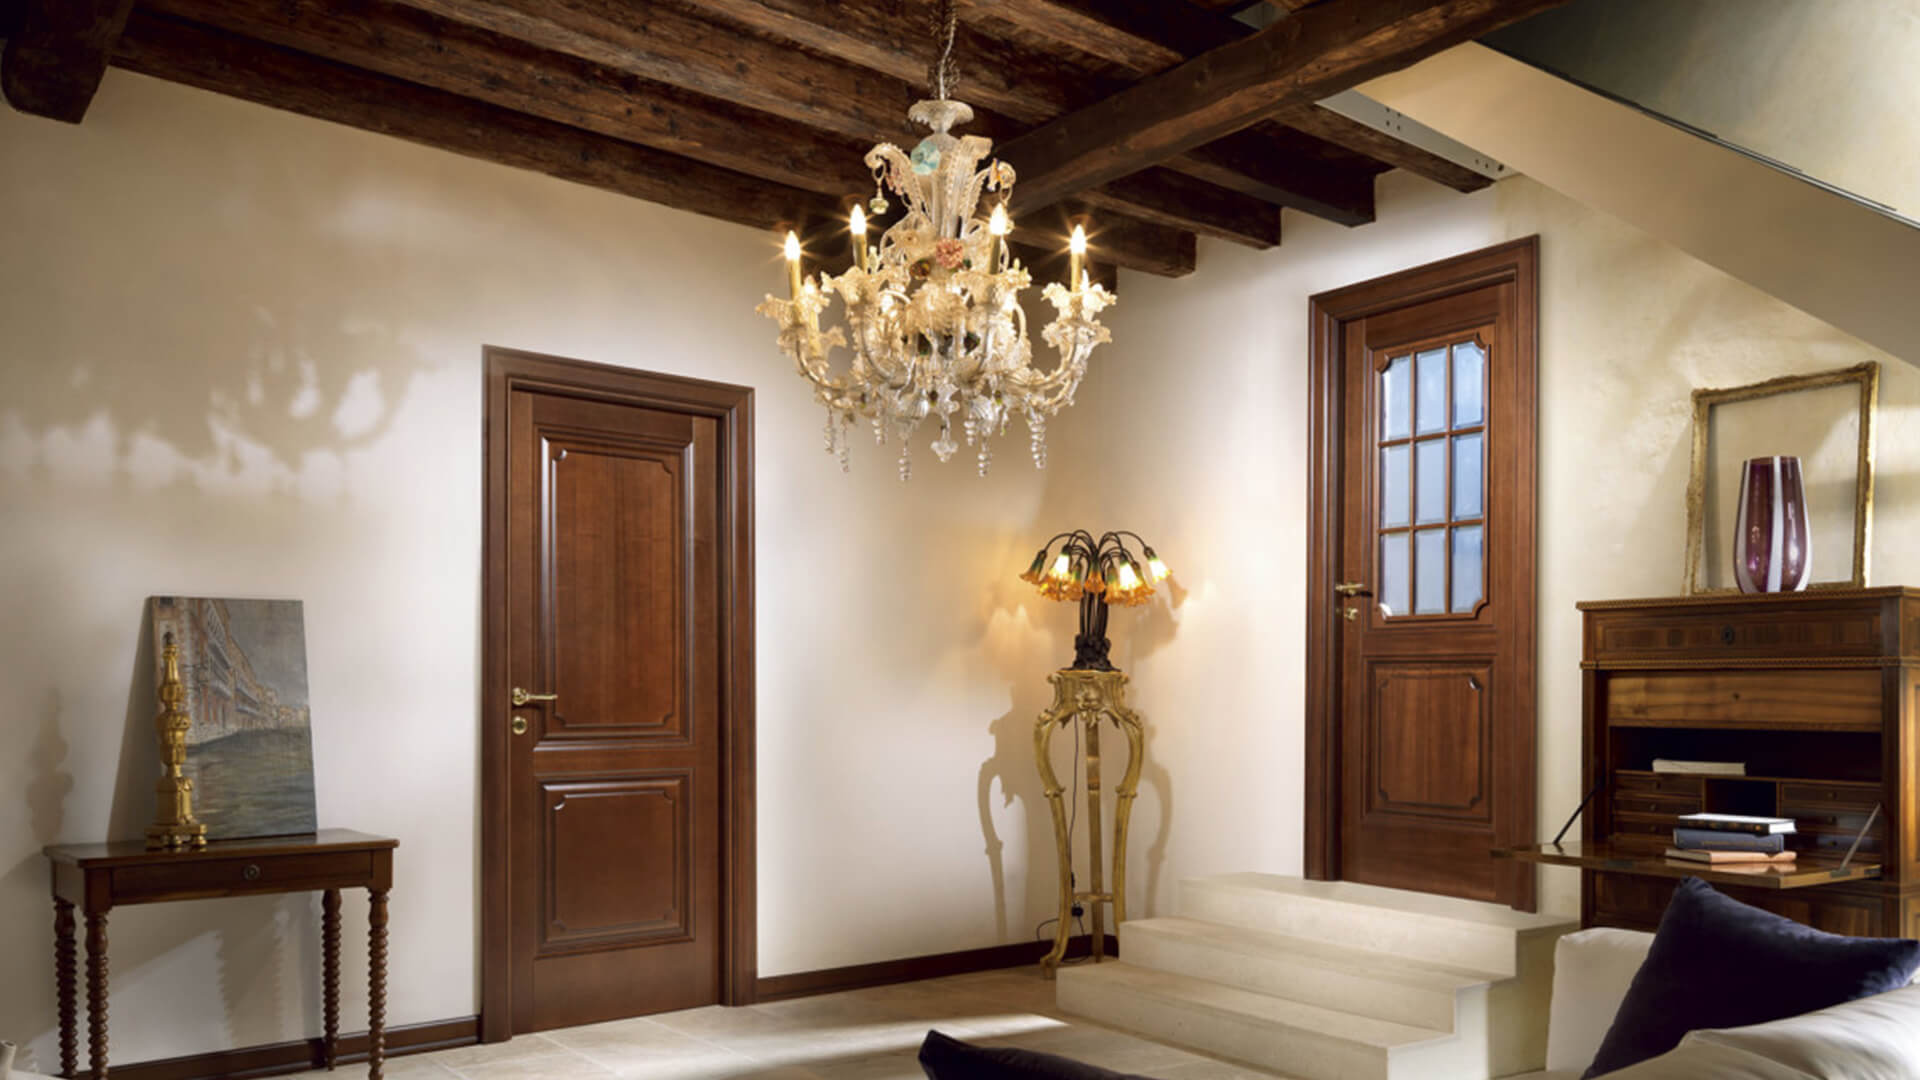 Blog IDW - How to choose the doors of your home